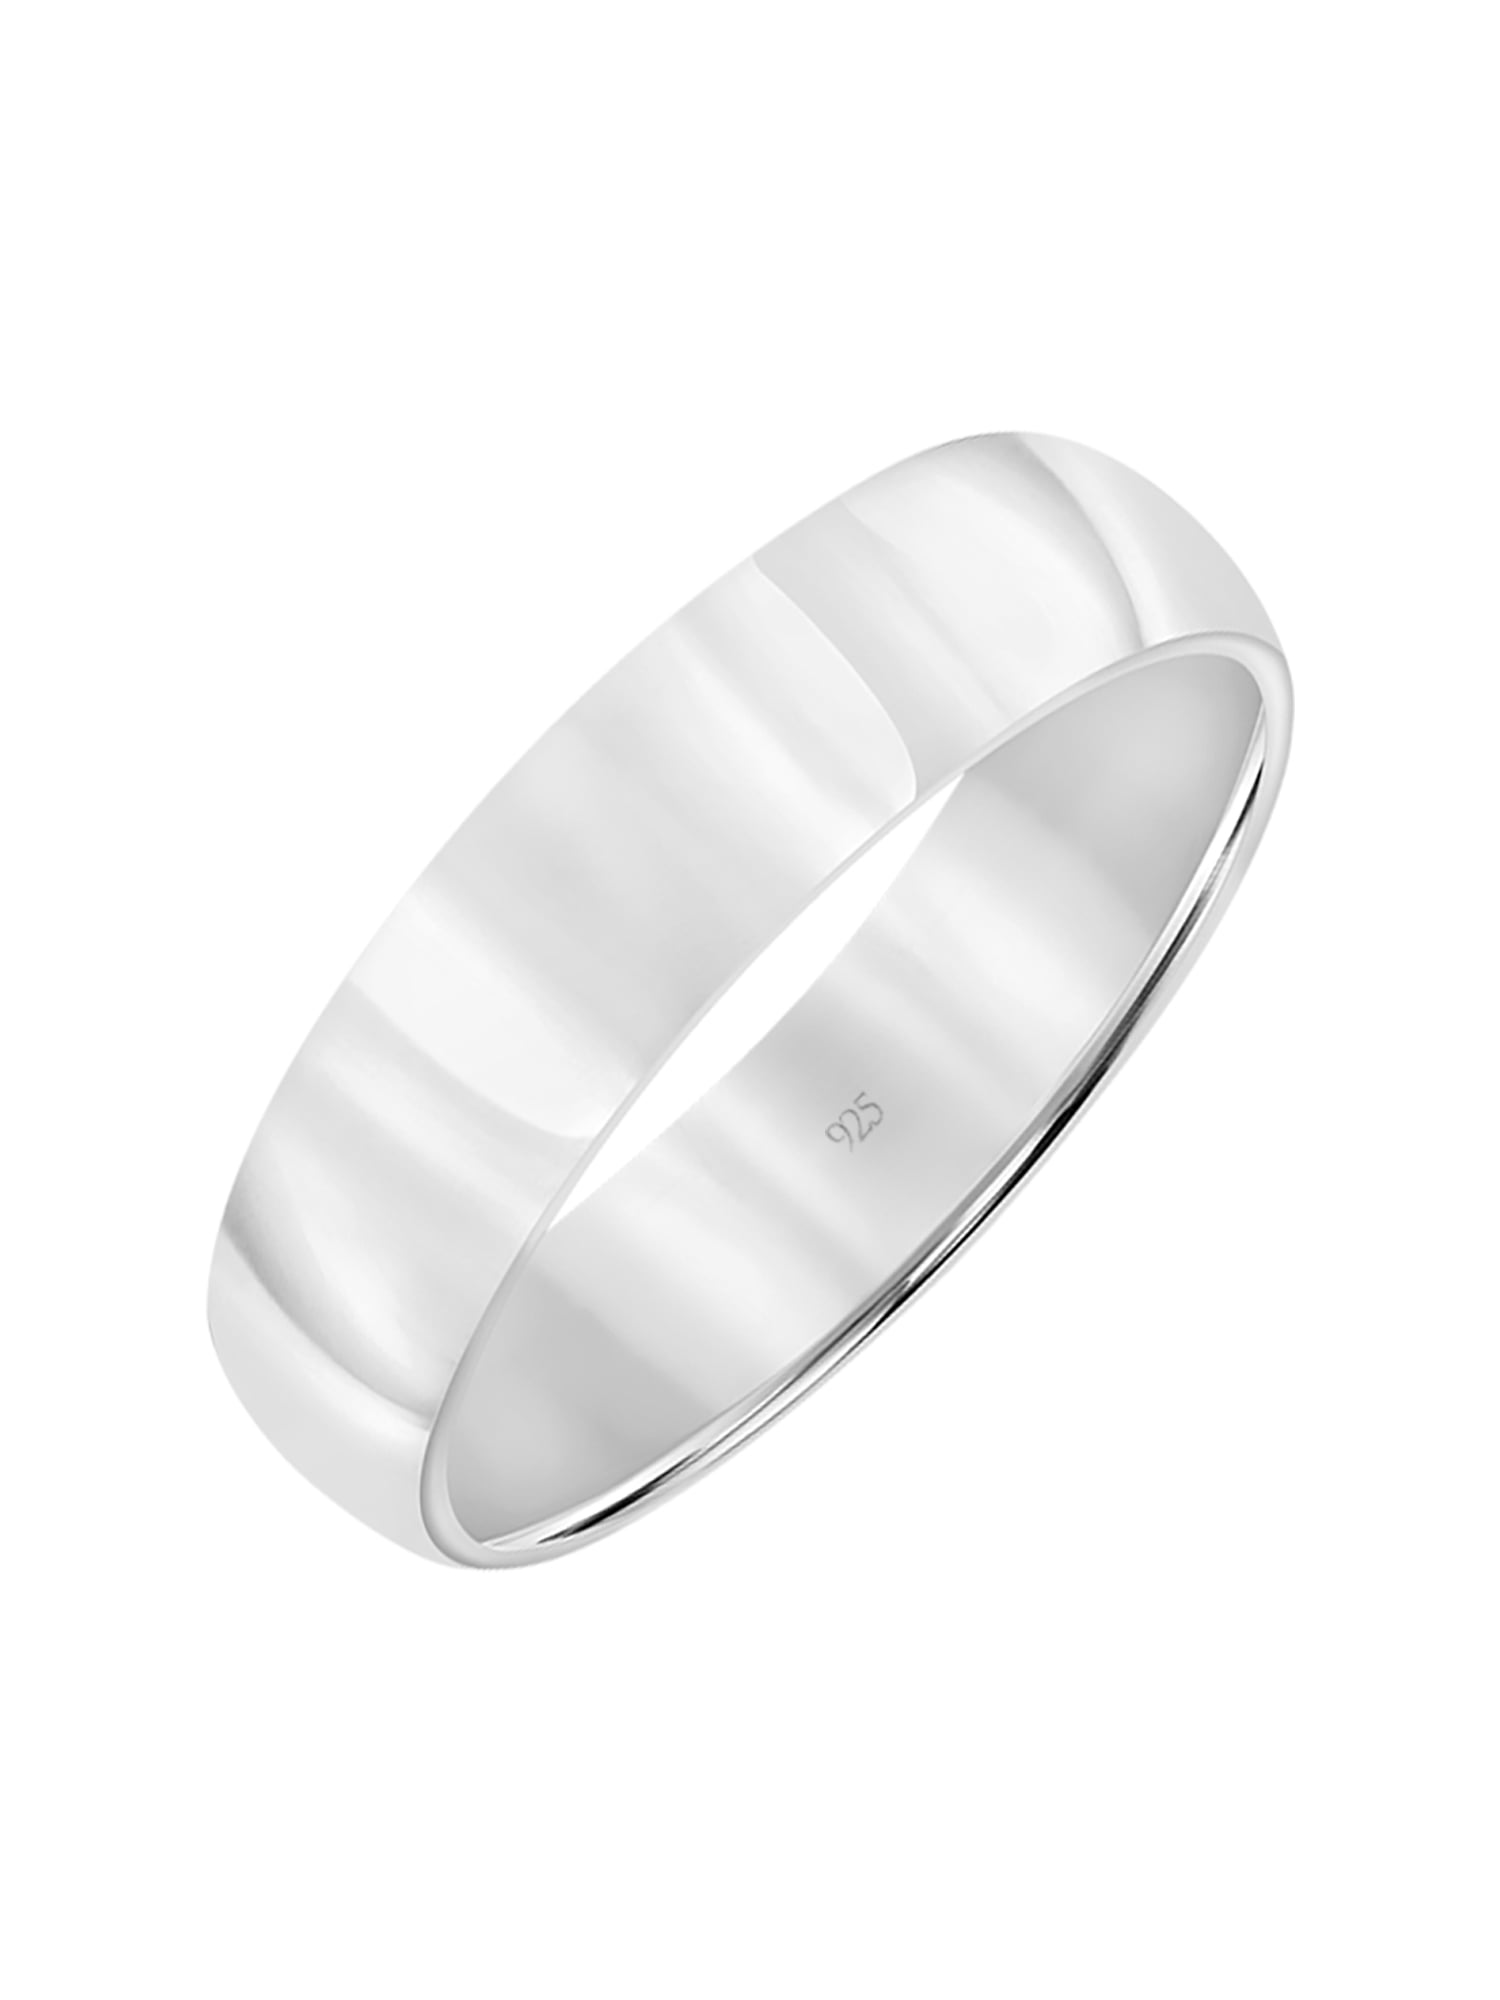 Comfort-Fit Wedding Band for Him Sterling Silver – Ice Dazzle